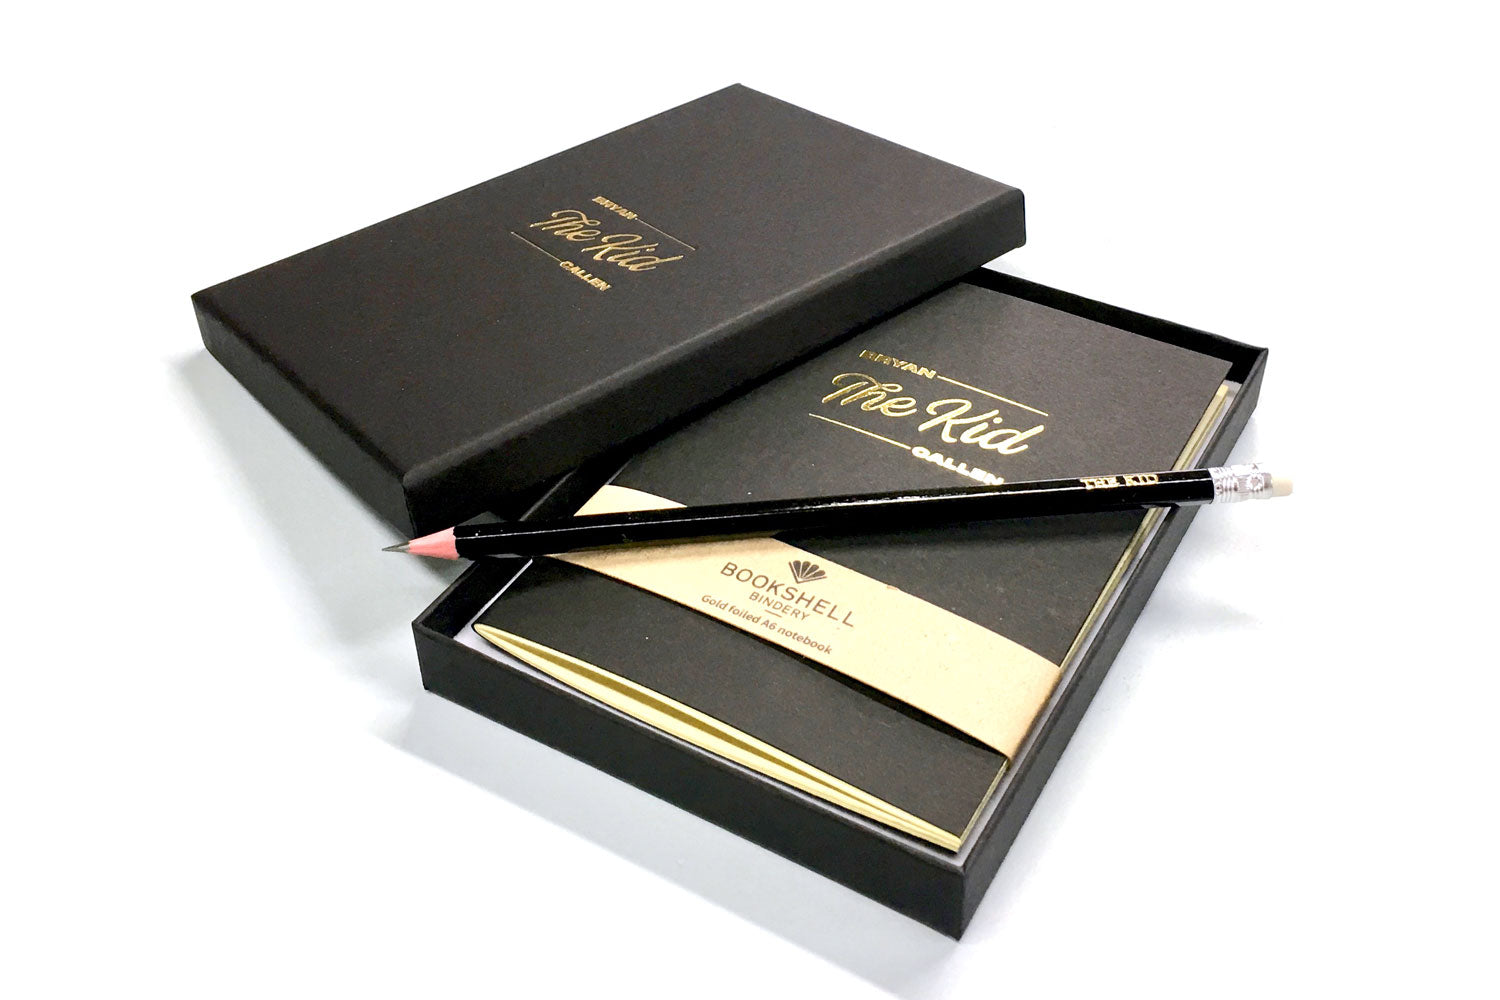 Customised pocket notebook with your own custom artwork embossed on the cover in gold foil